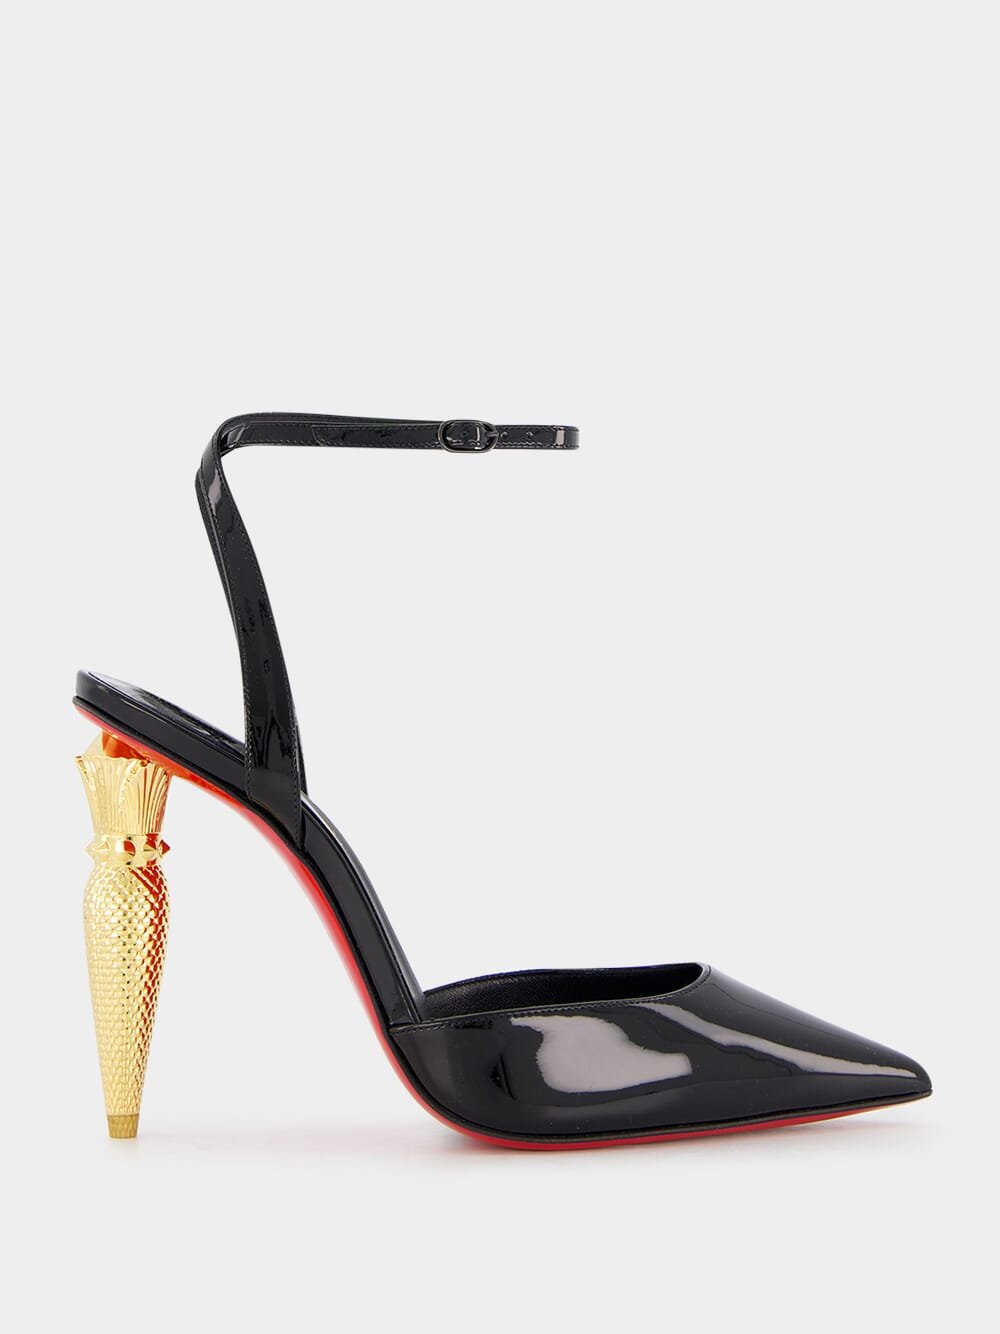 Christian LouboutinLipChick 100mm Patent-Leather Pumps at Fashion Clinic